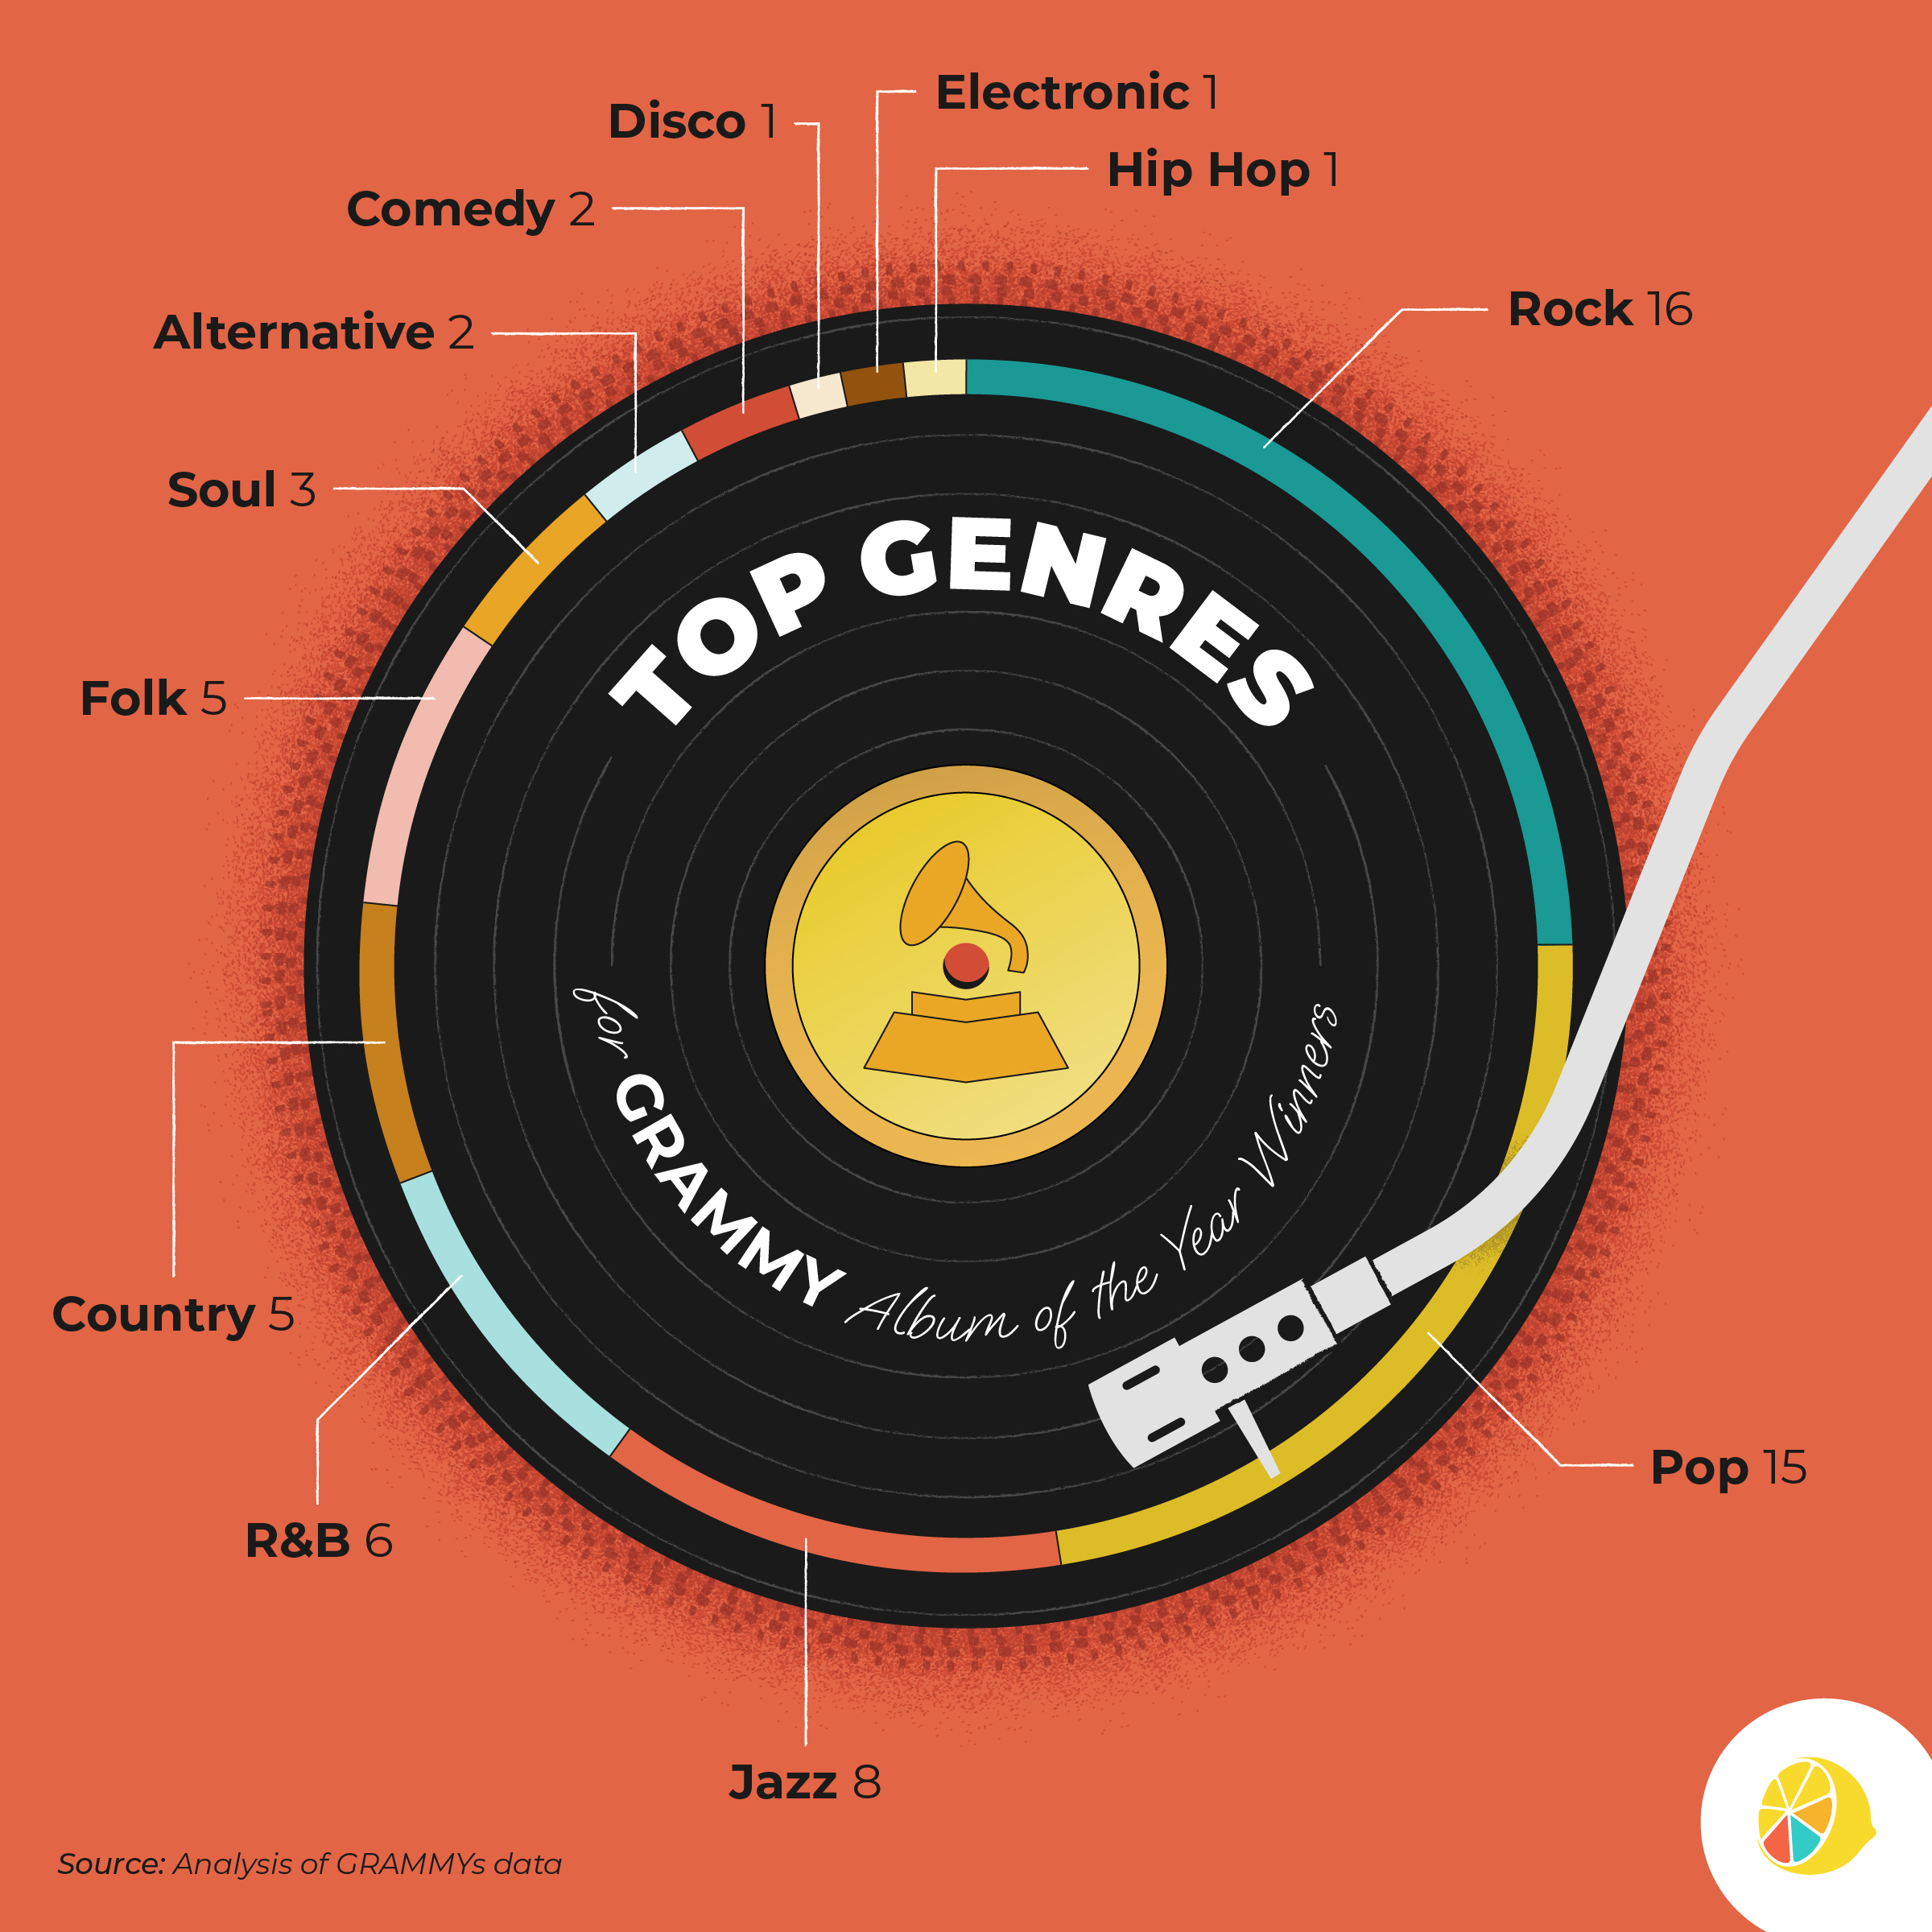 Top Genres for GRAMMY Album of the Year